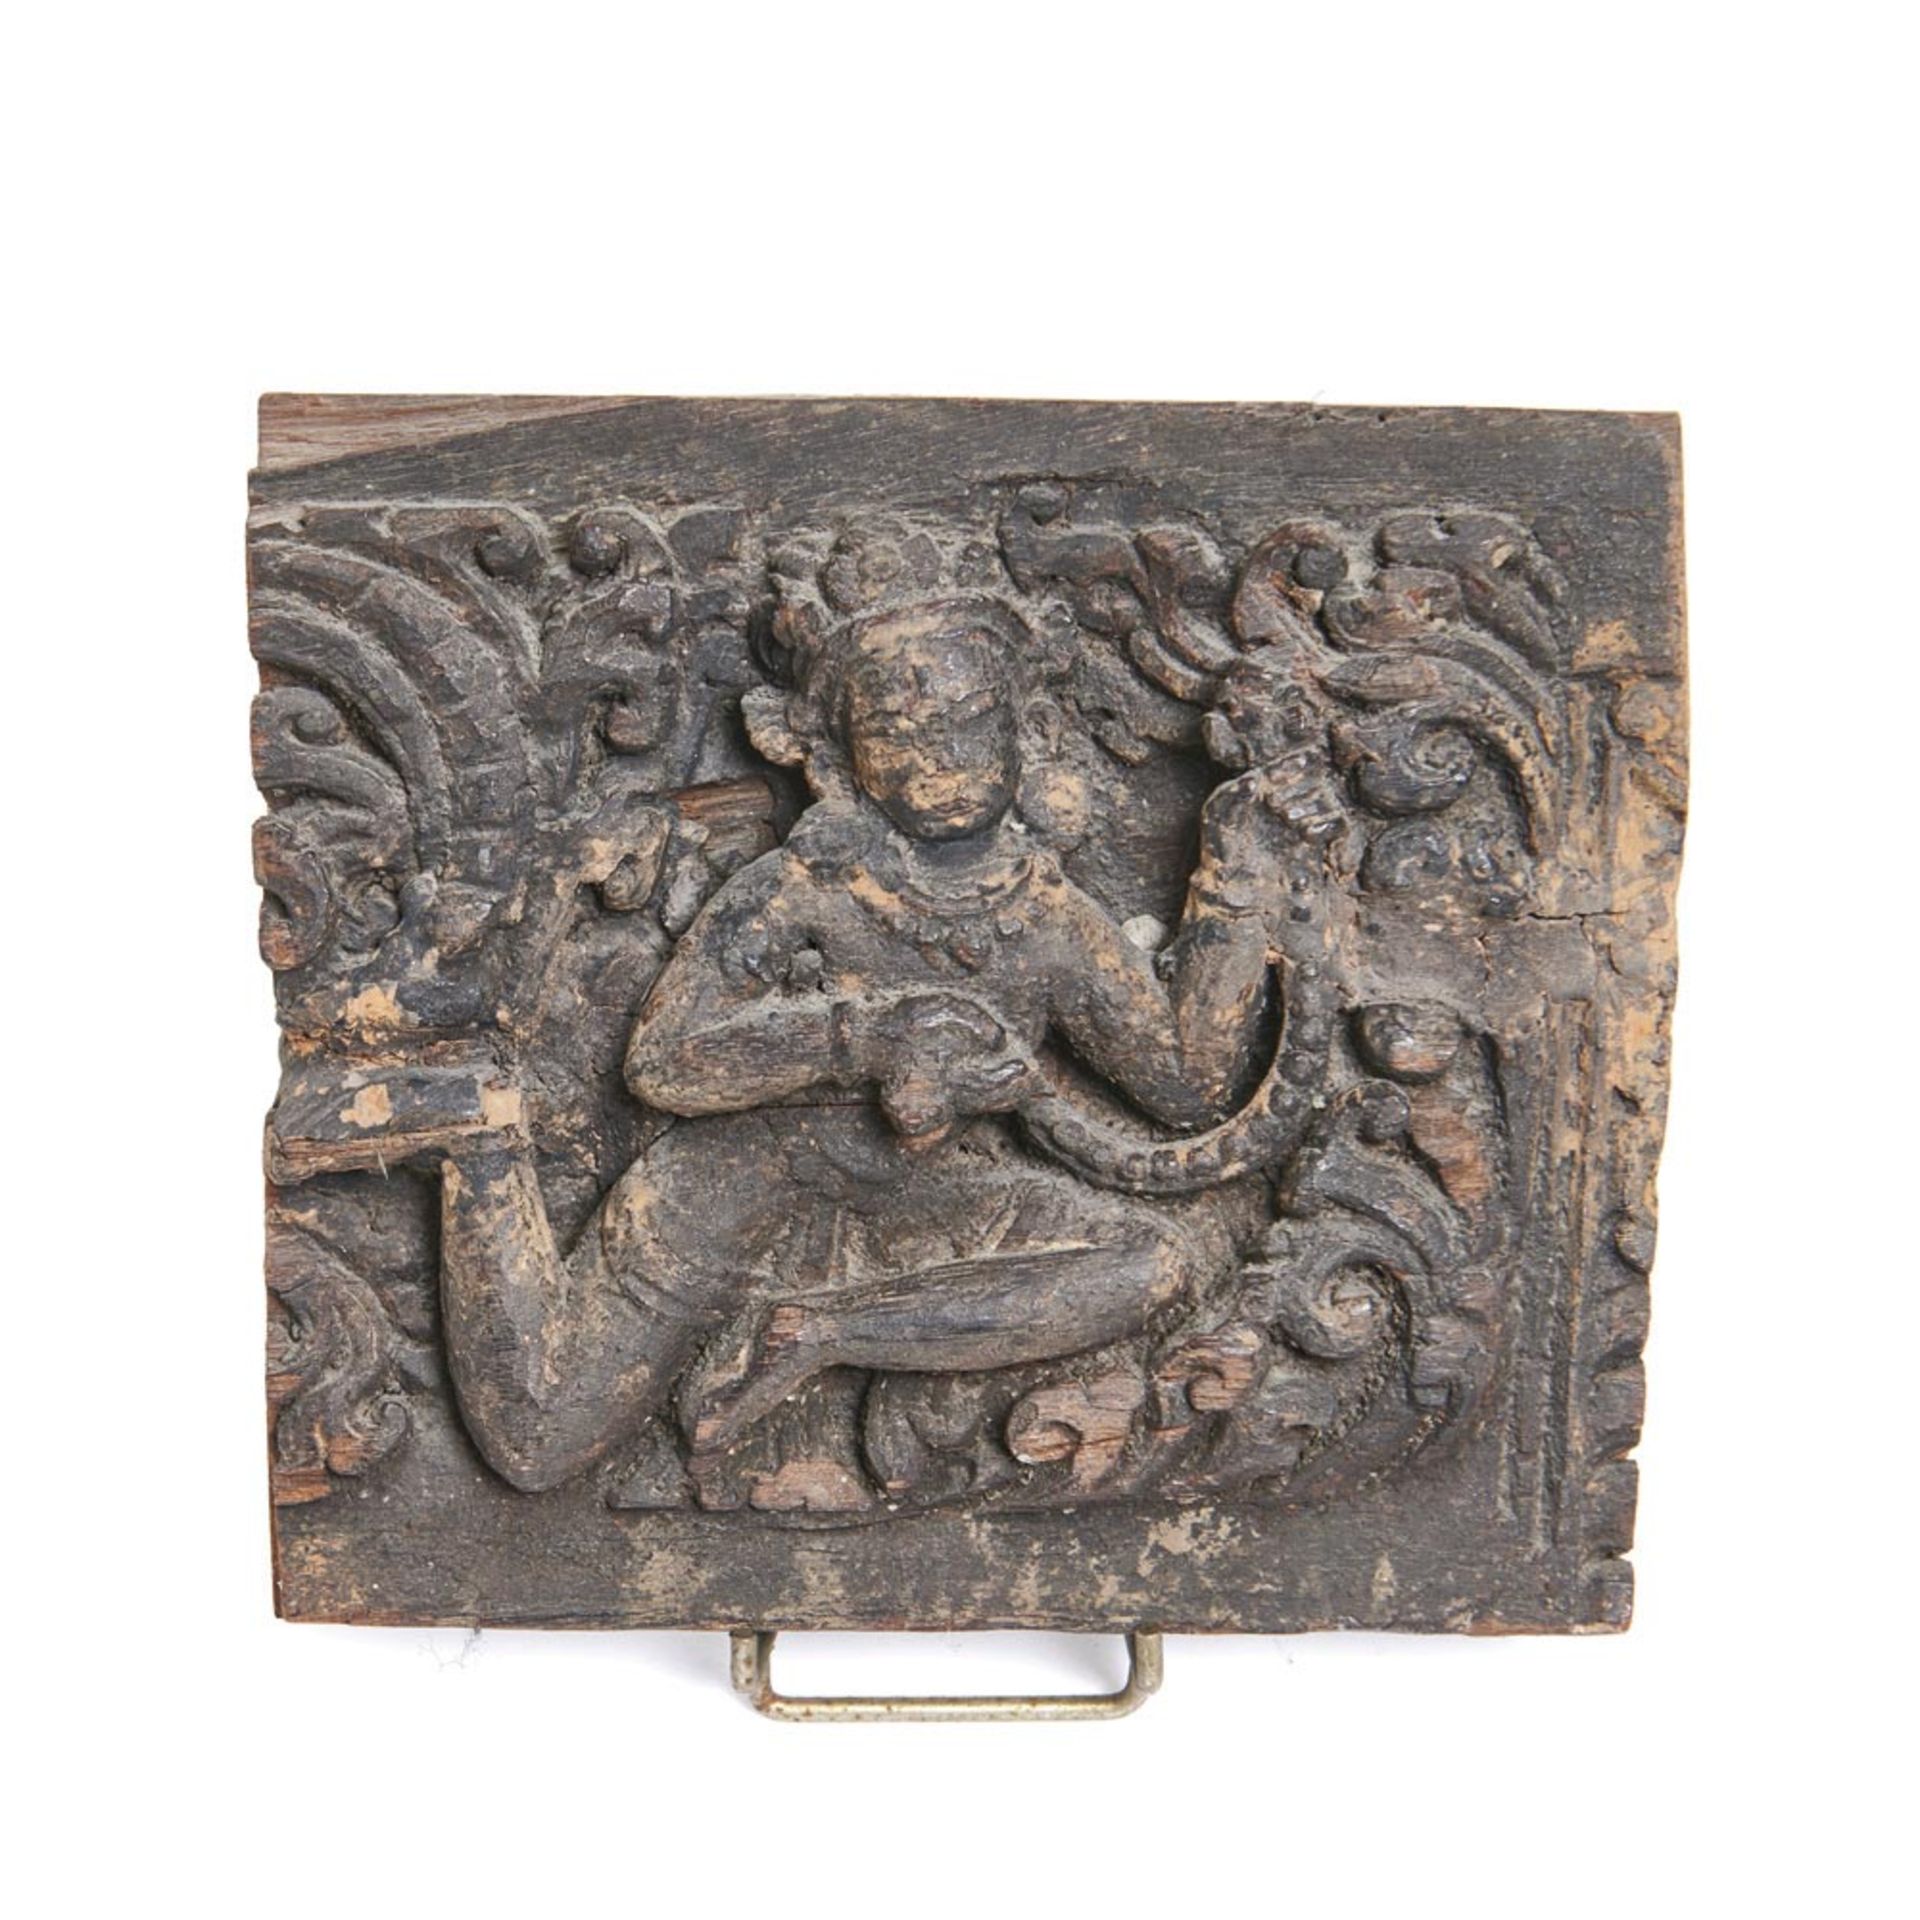 Nepalese carved wood high-relief 19th century.